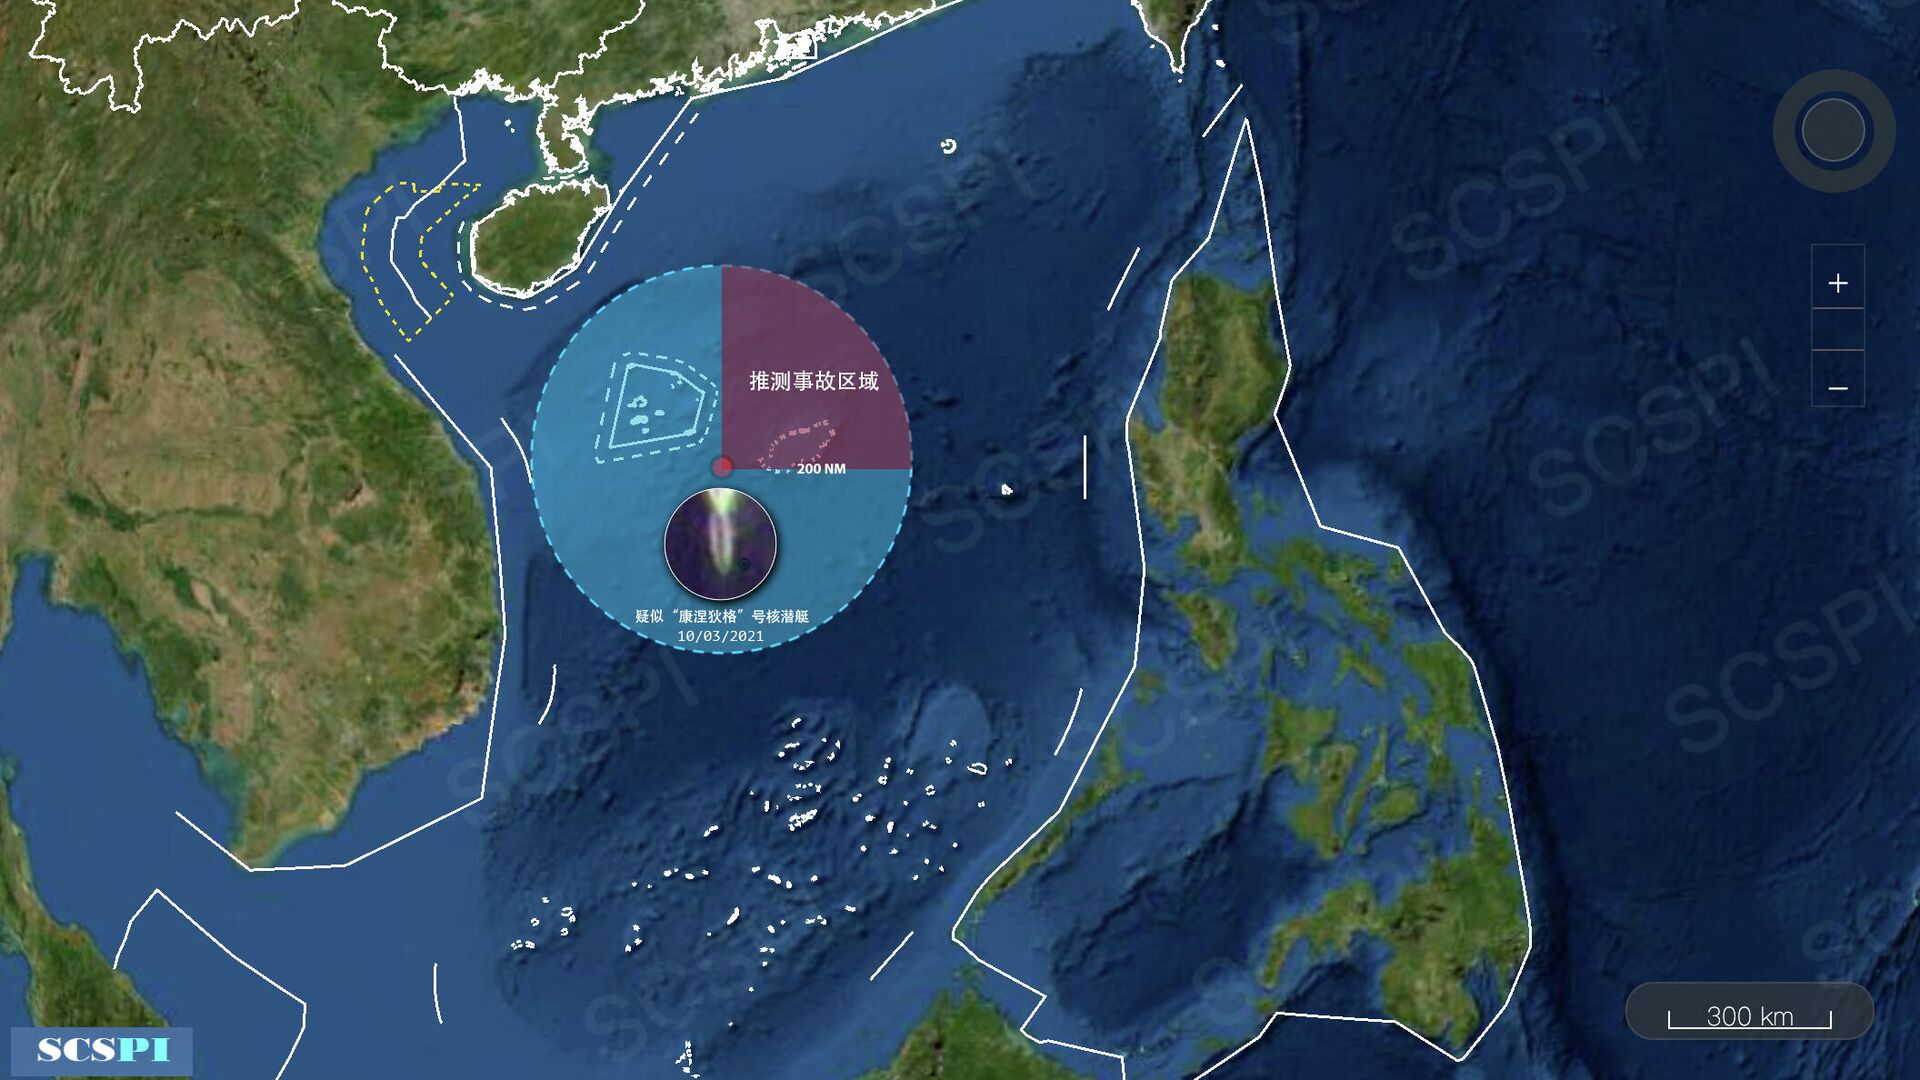 If this is. It's not hard to figure out the general area of the accident. Whether USS Connecticut was assigned to guard the USS Carl Vinson or to spy on PLA's SSBNs, there's a lot of potential in this triangle area of Hainan Island, the Paracel Islands and Bashi Channel. - Sputnik International, 1920, 14.10.2021